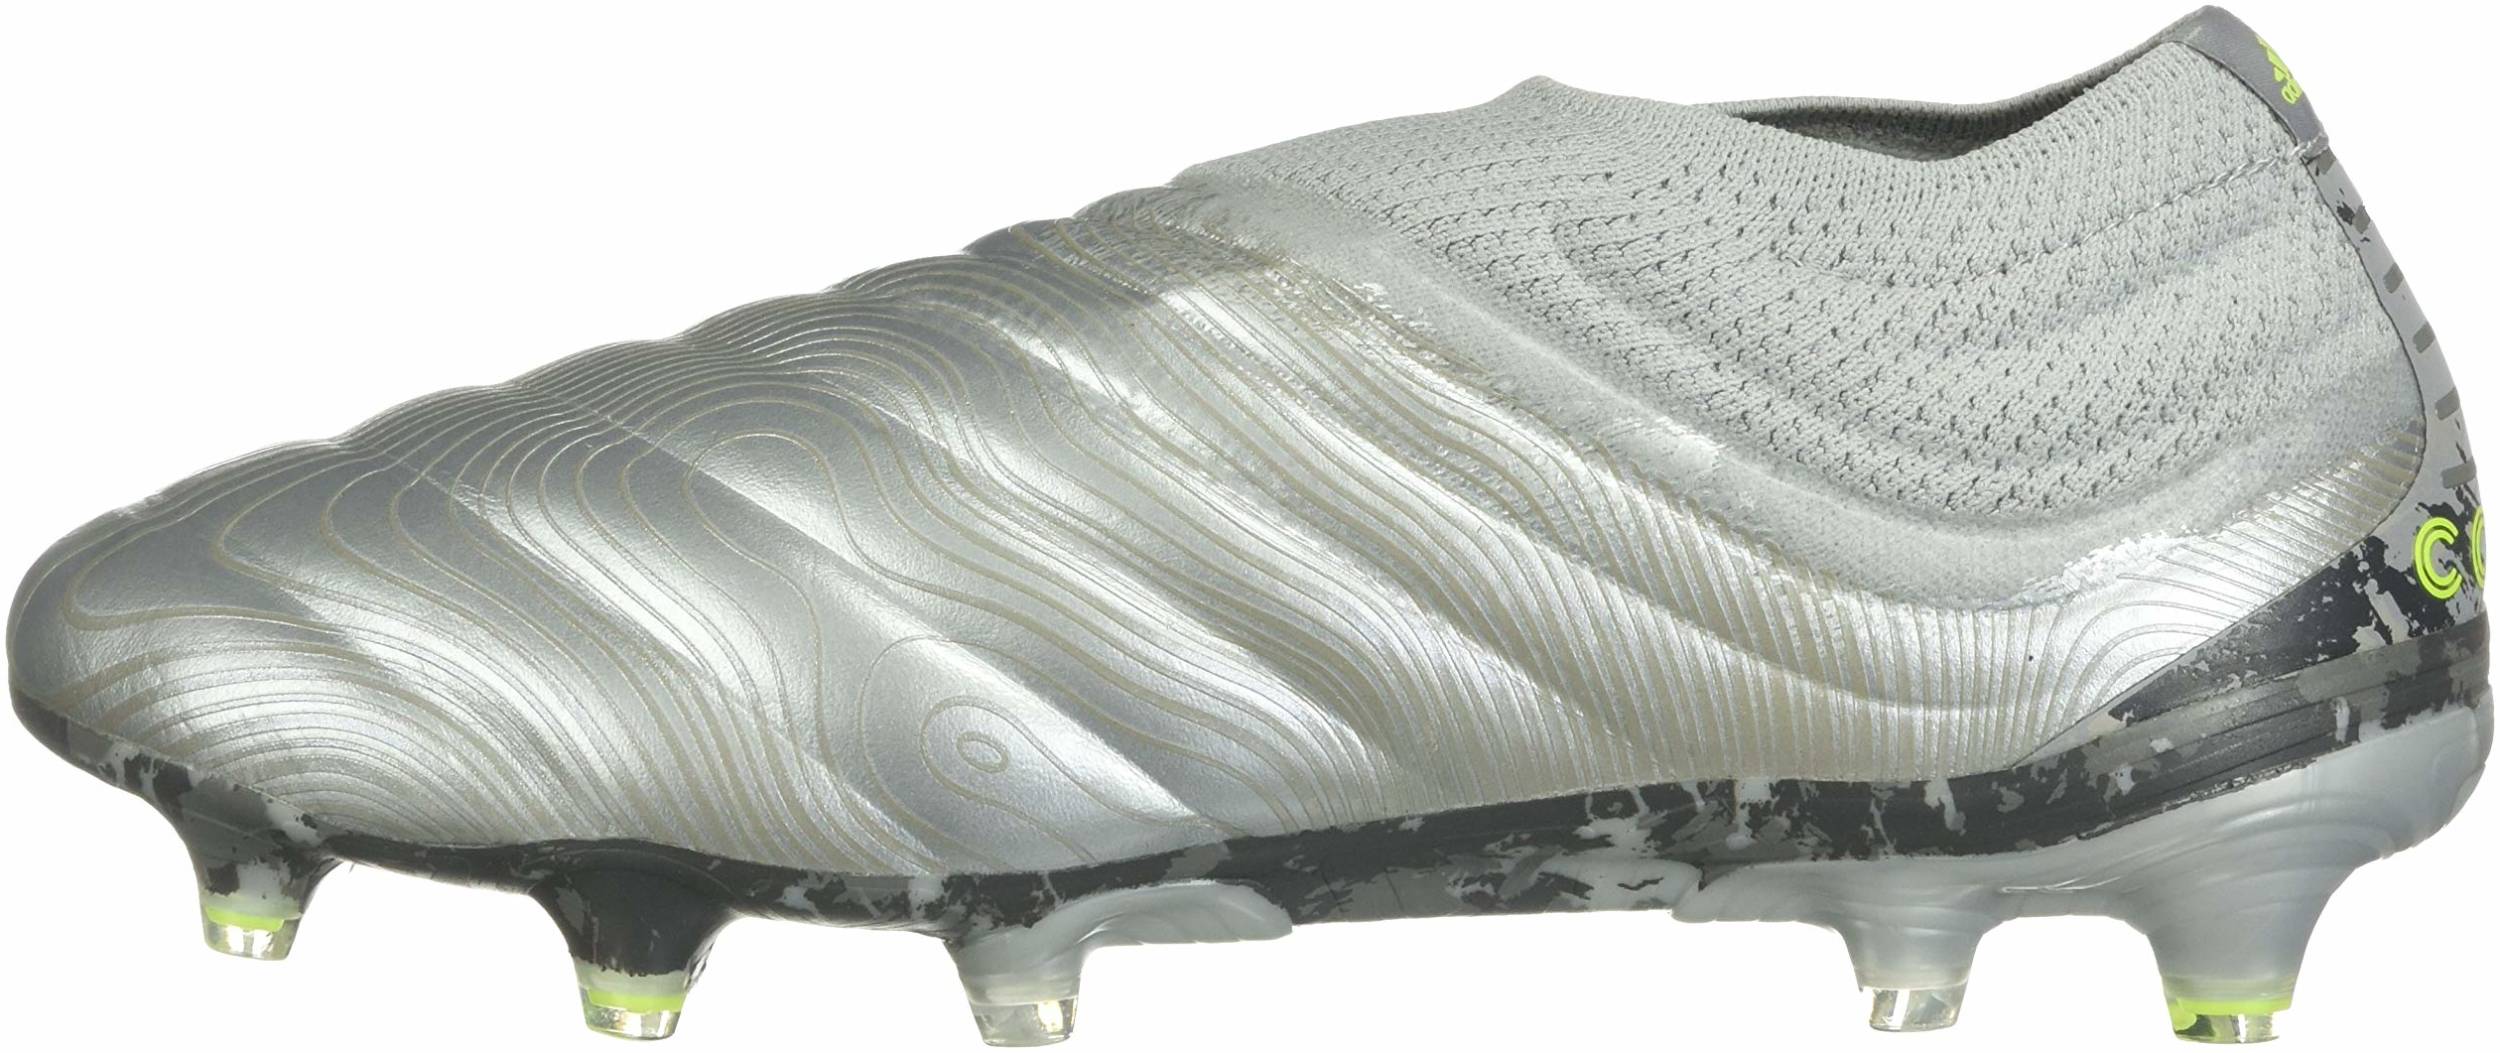 20+ Laceless soccer cleats: Save up to 